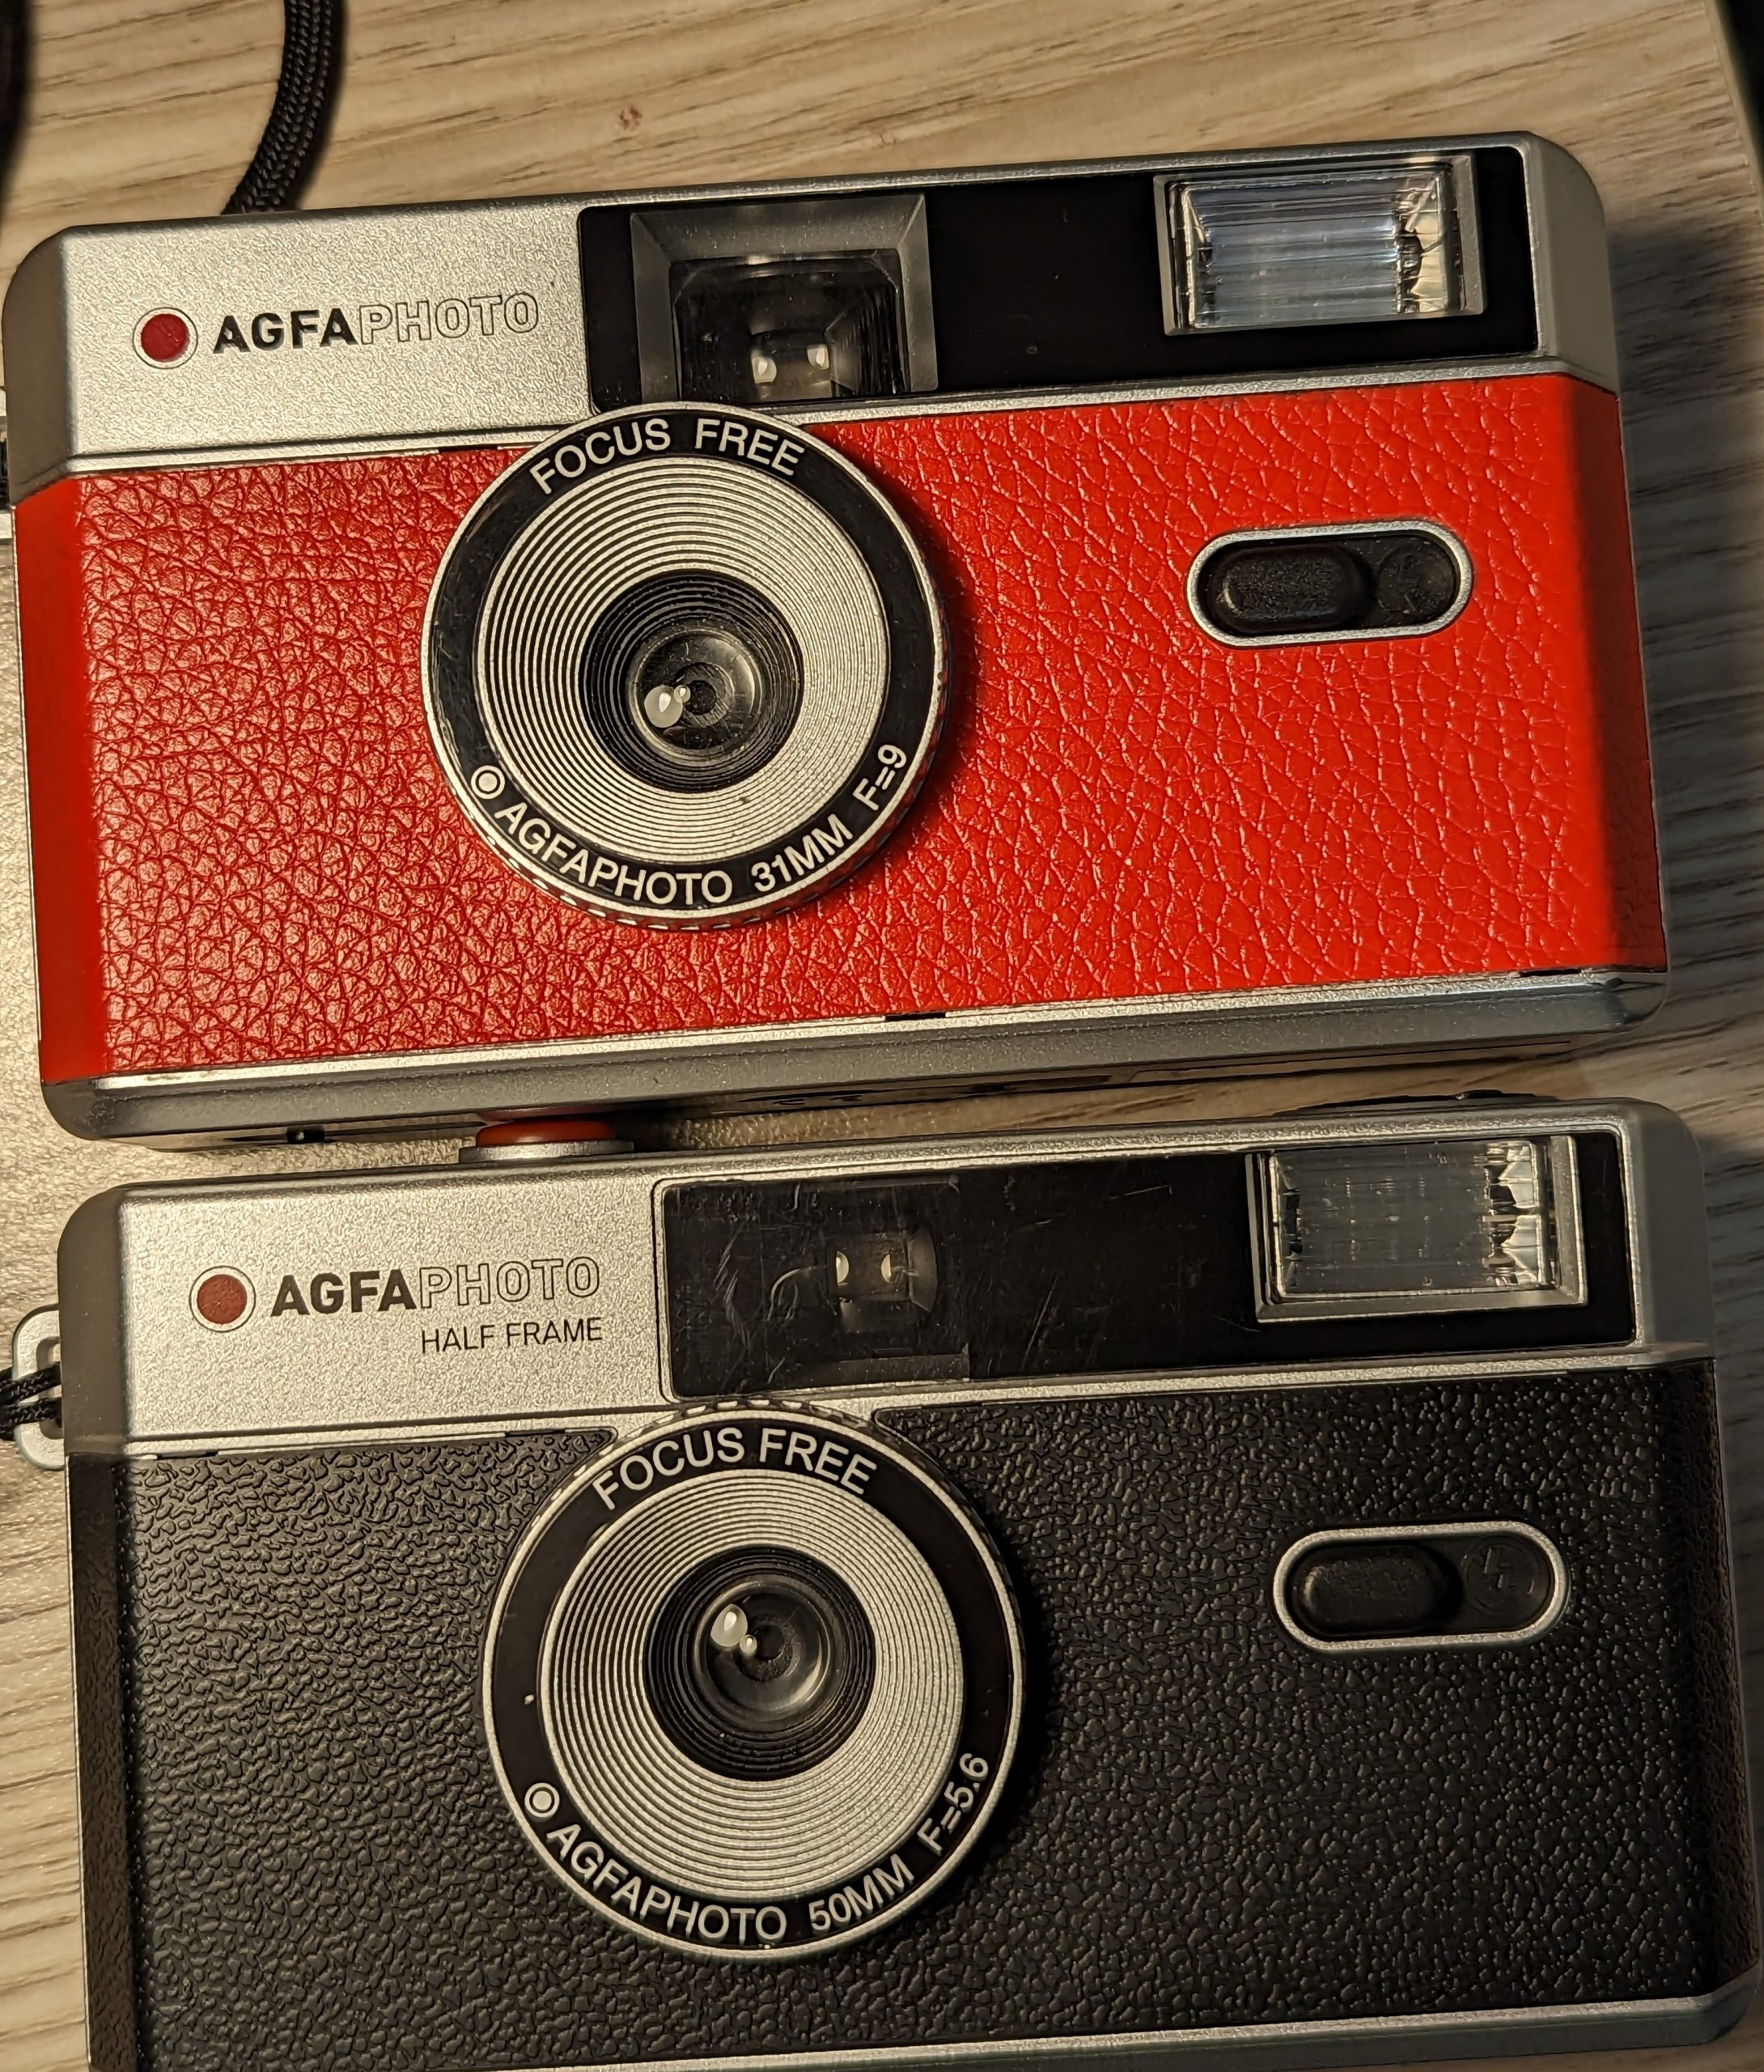 Agfaphoto film camera (top in red) is full frame and the new half frame version